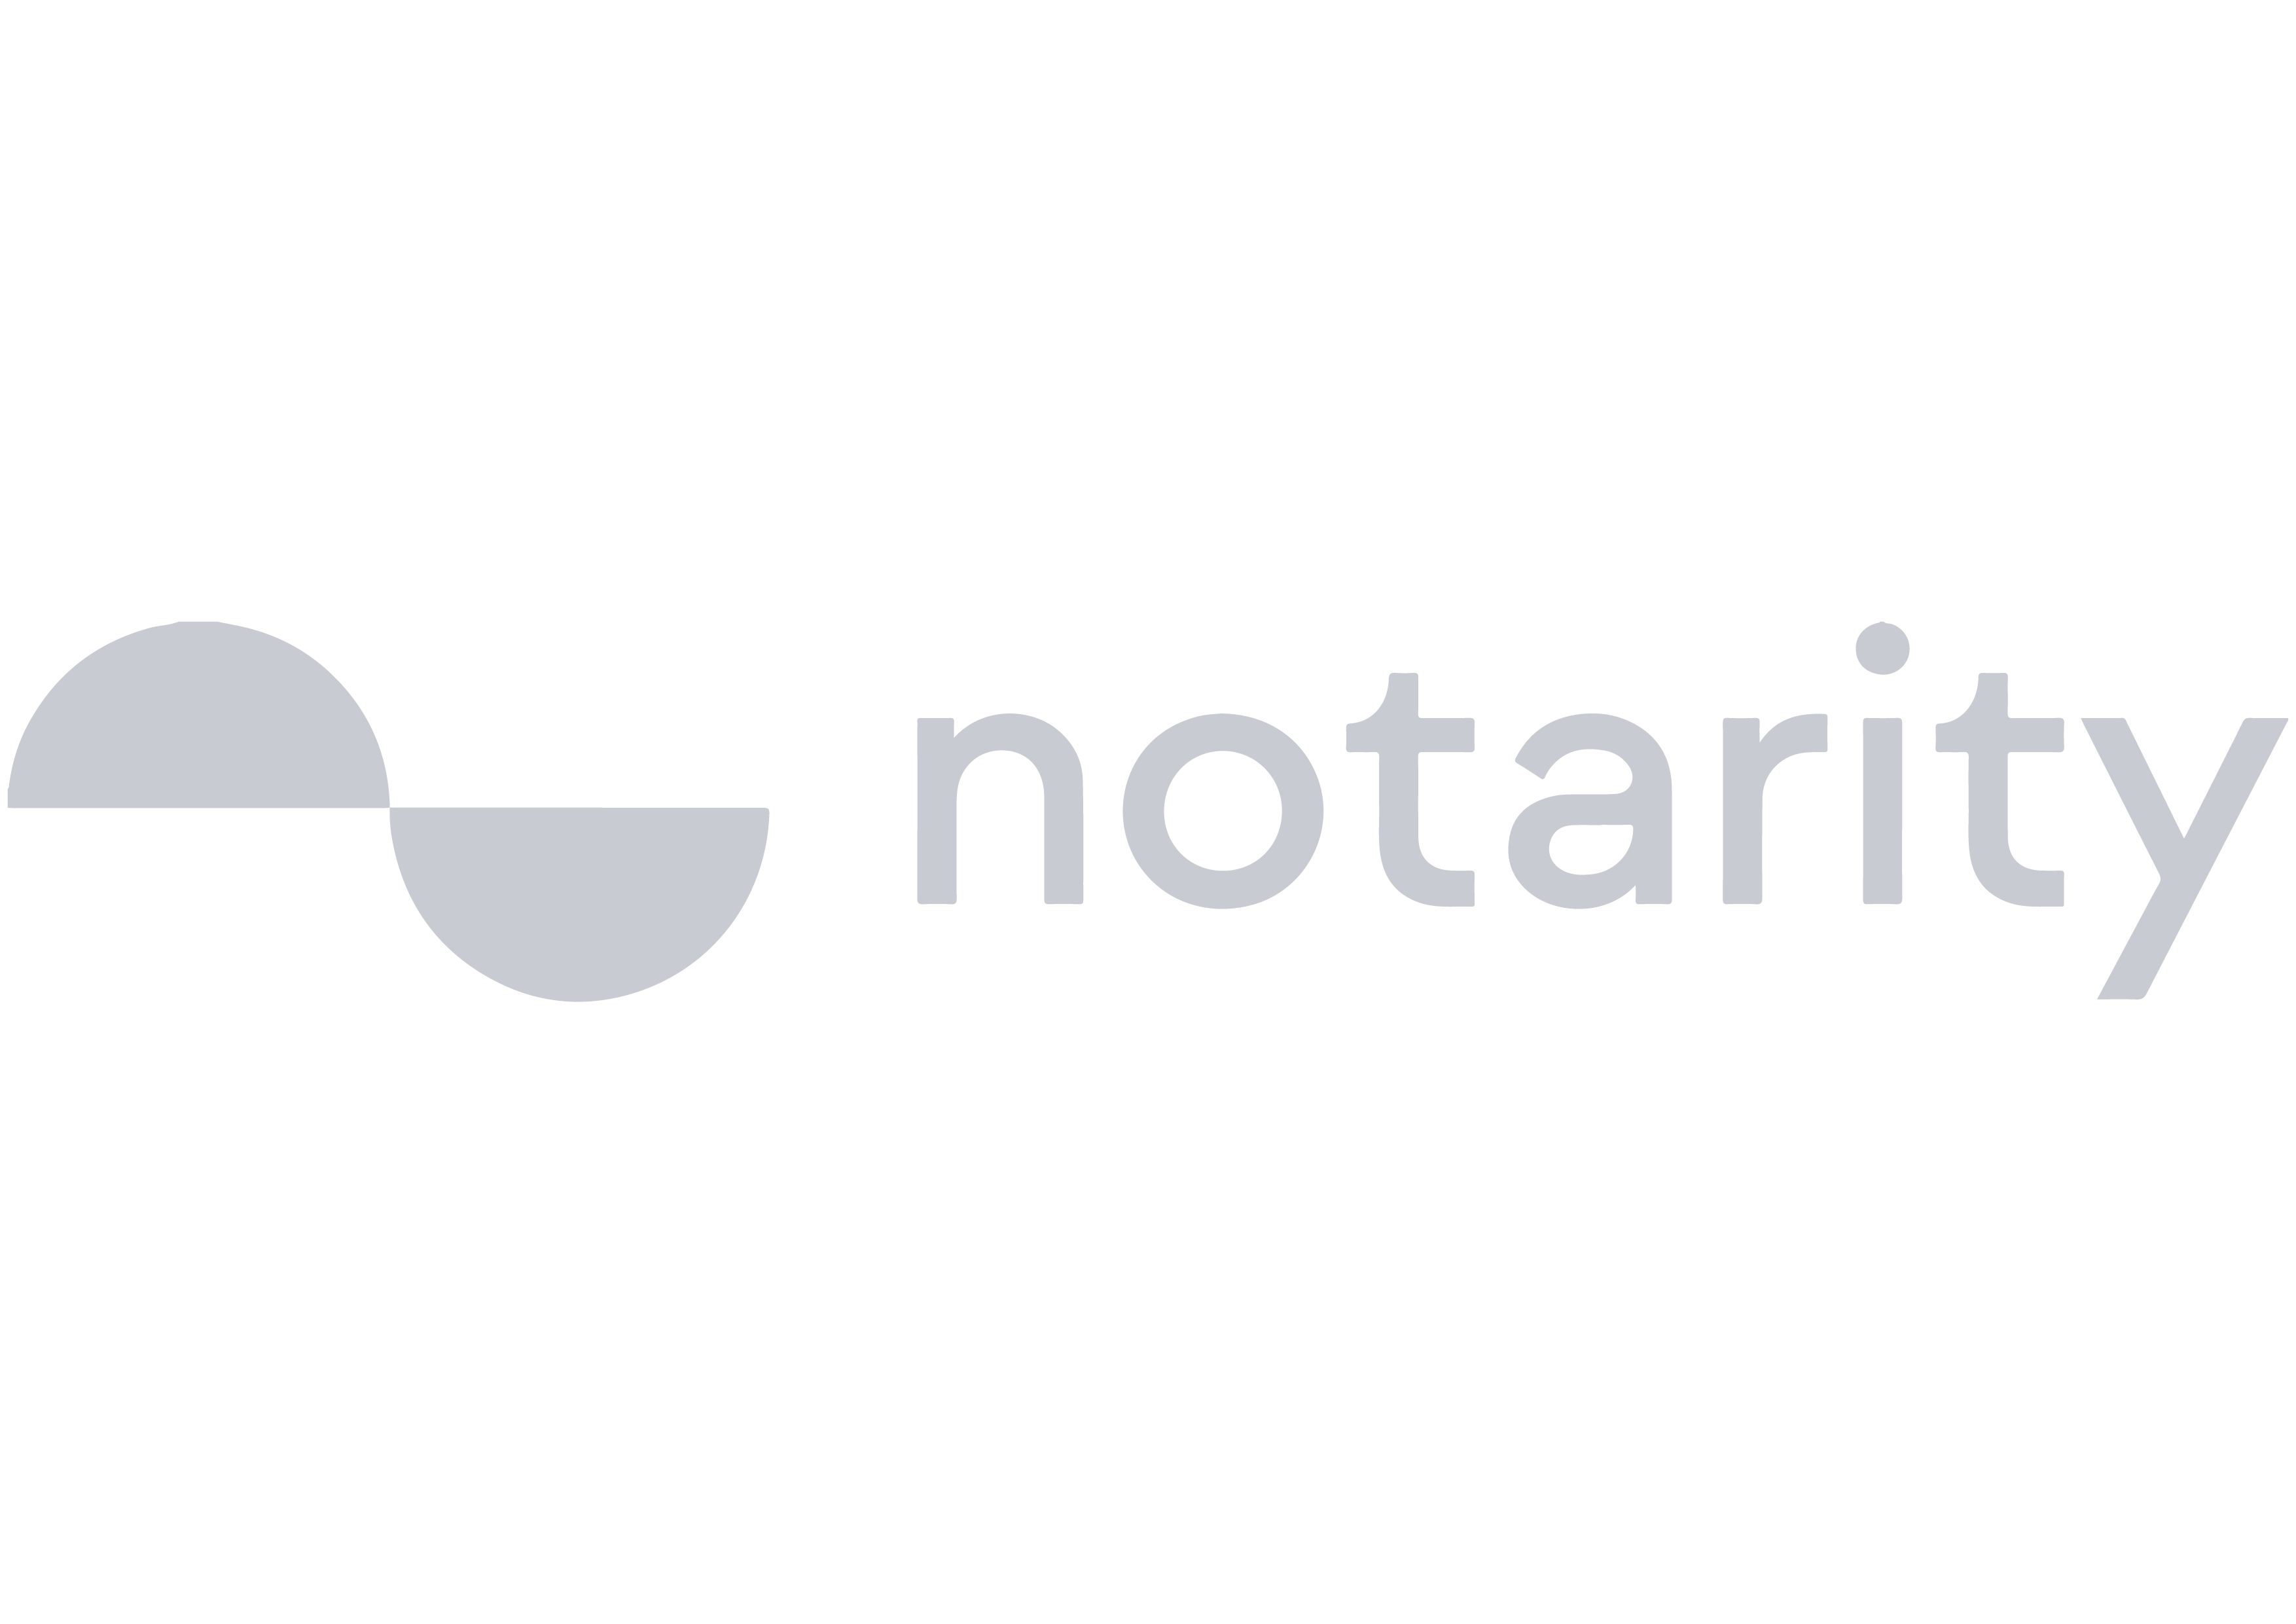 Notarity-01.png